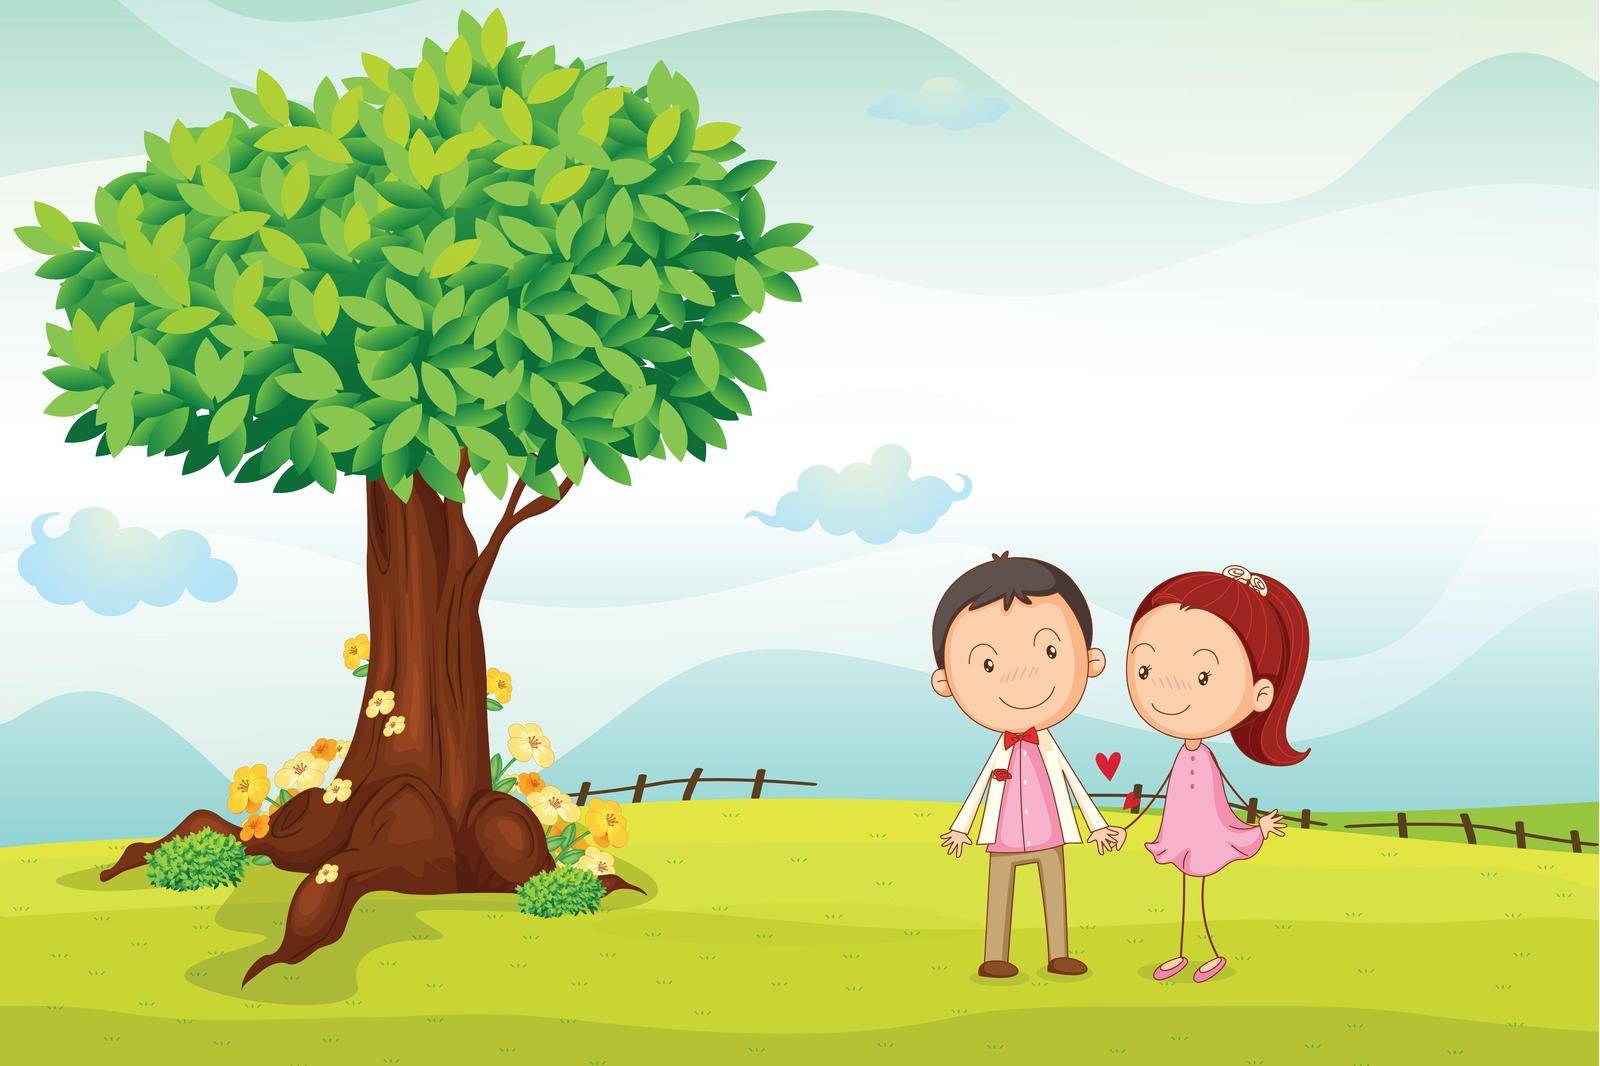 illustration of kids playing around tree in a nature